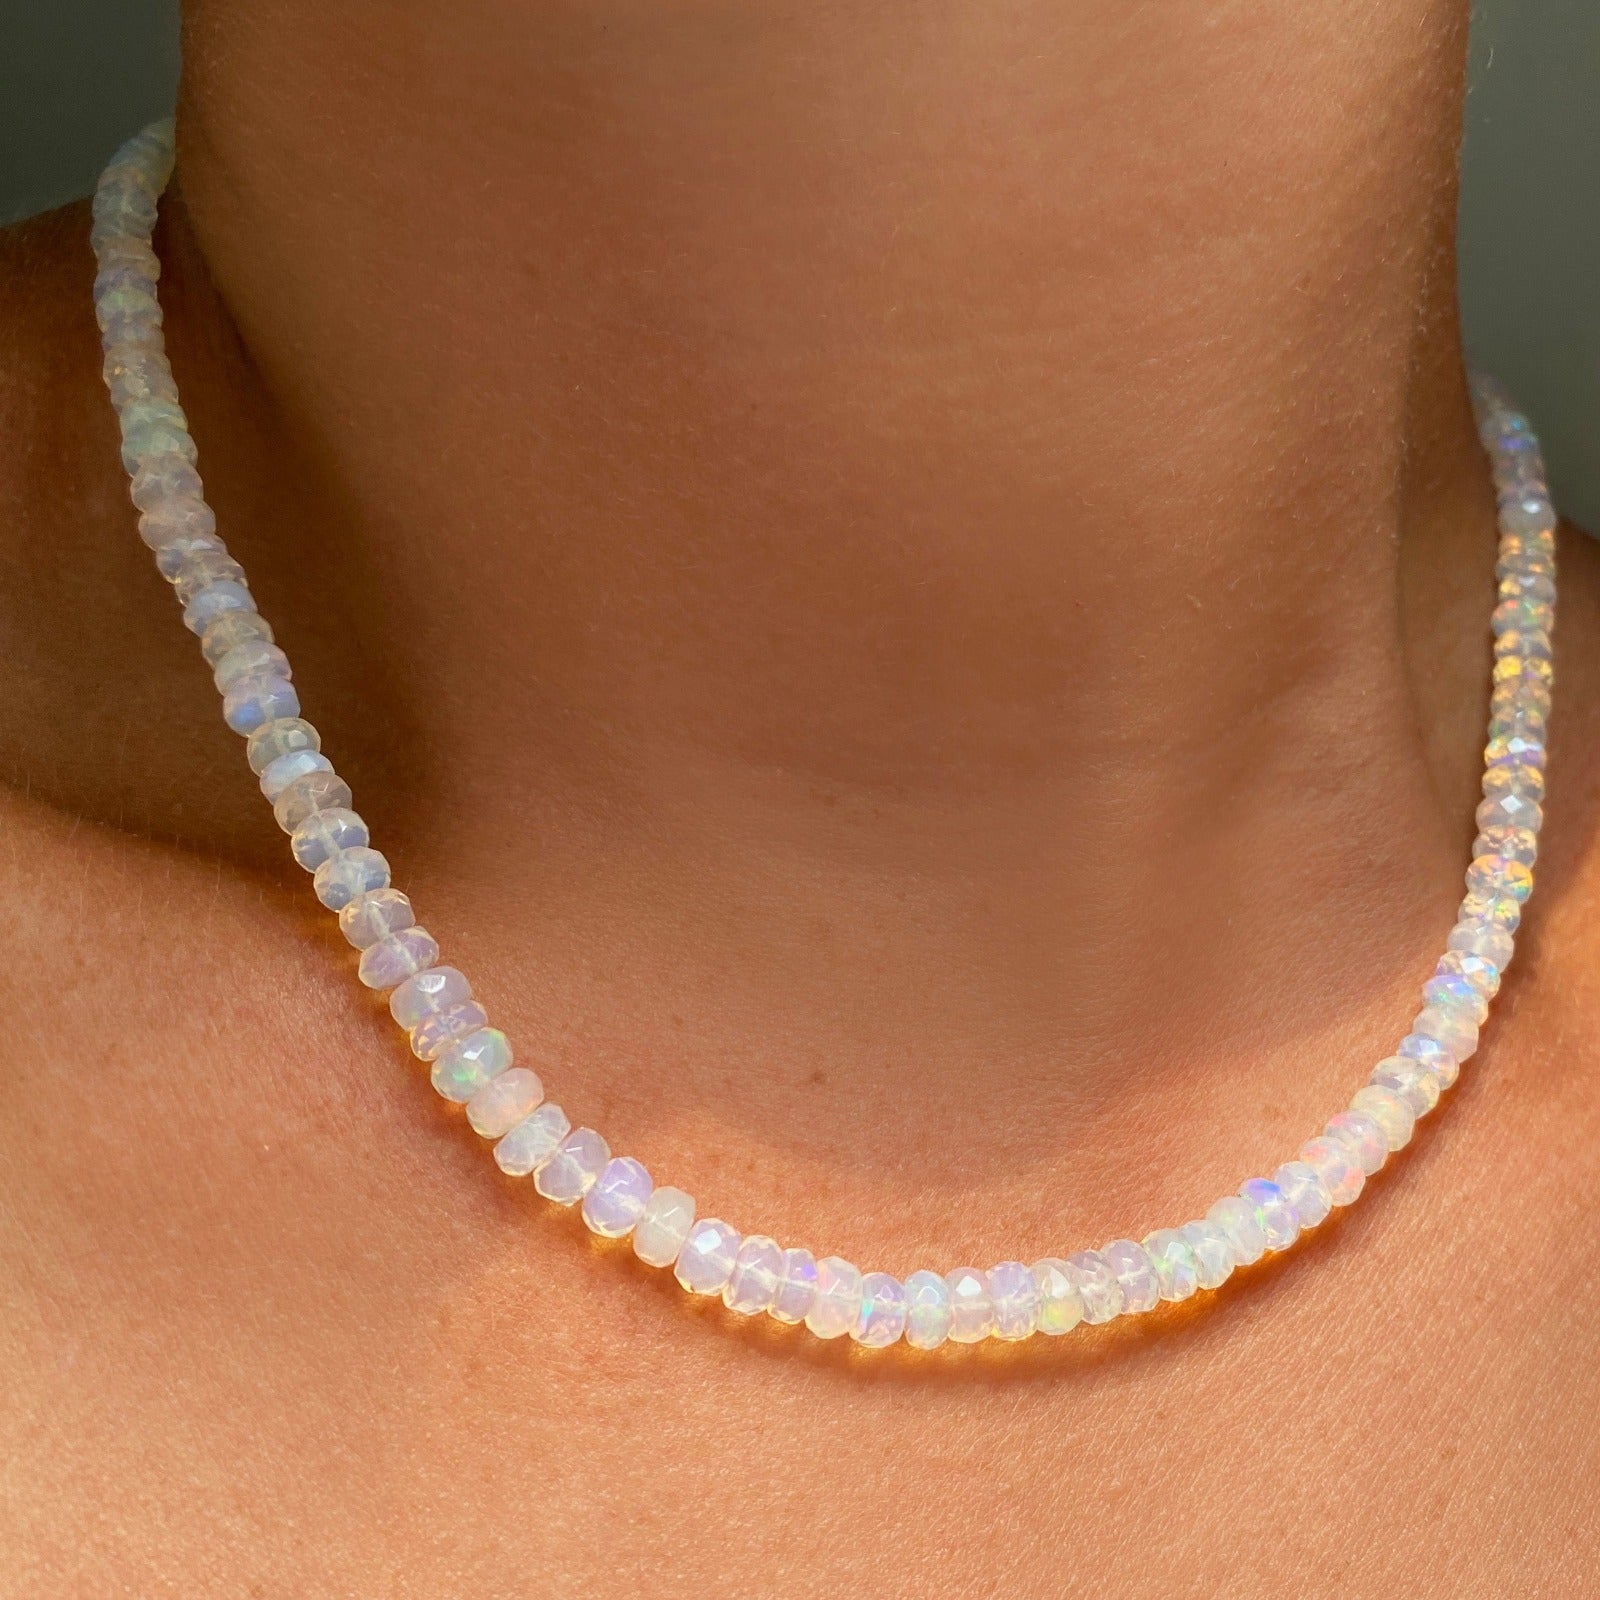 Shimmering beaded necklace made of faceted opals in shades of clear opals on a gold linking ovals clasp.